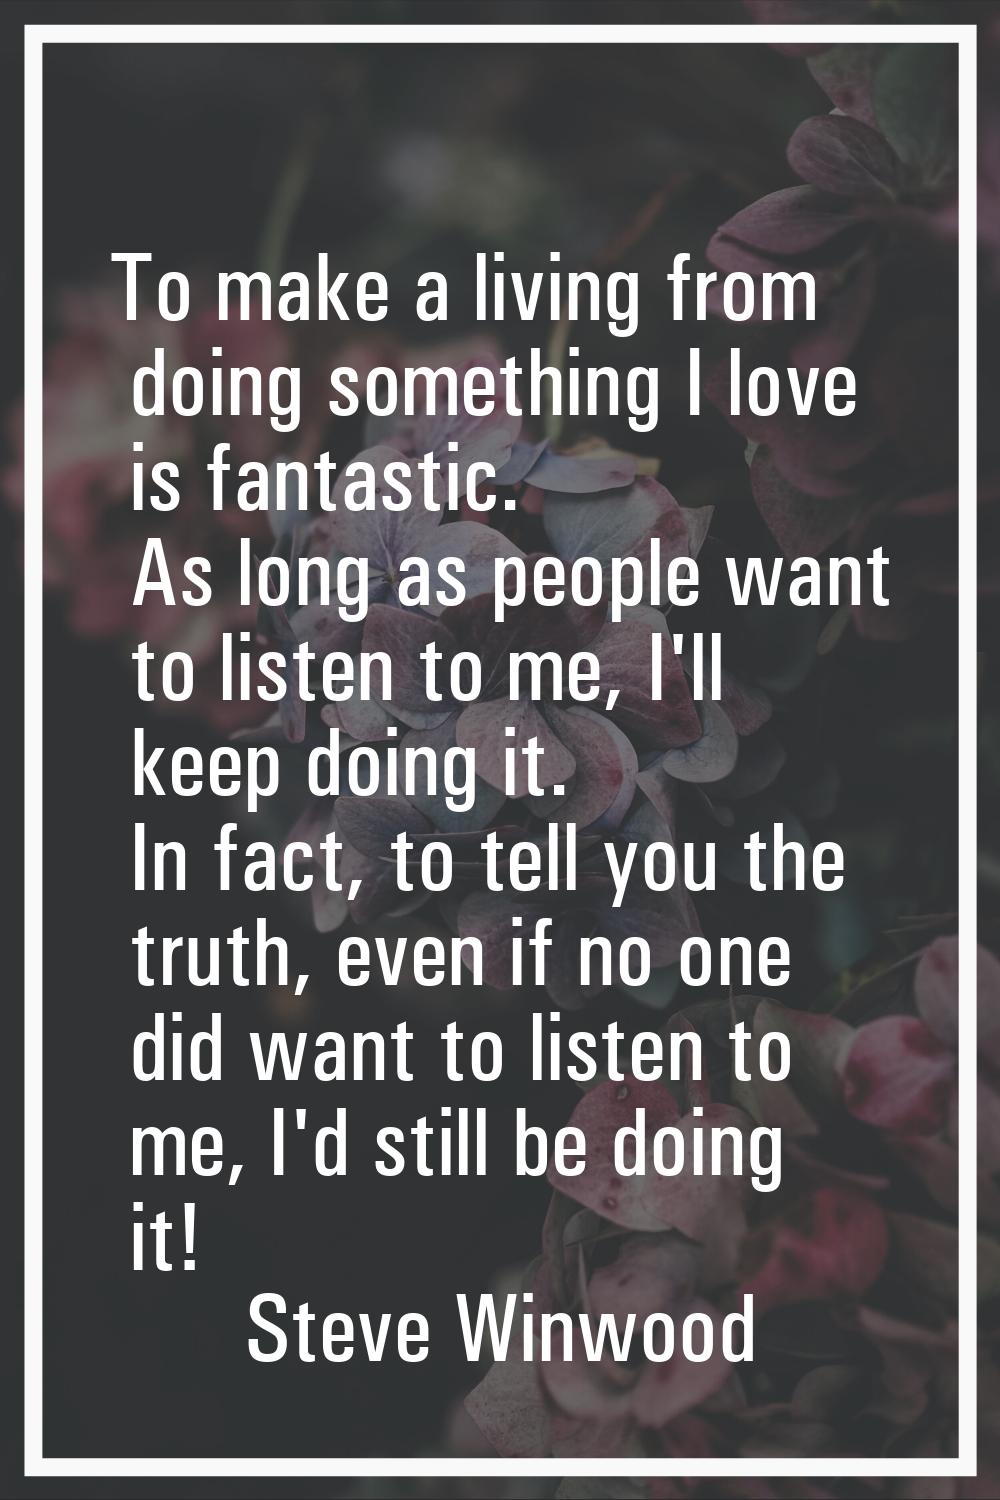 To make a living from doing something I love is fantastic. As long as people want to listen to me, 